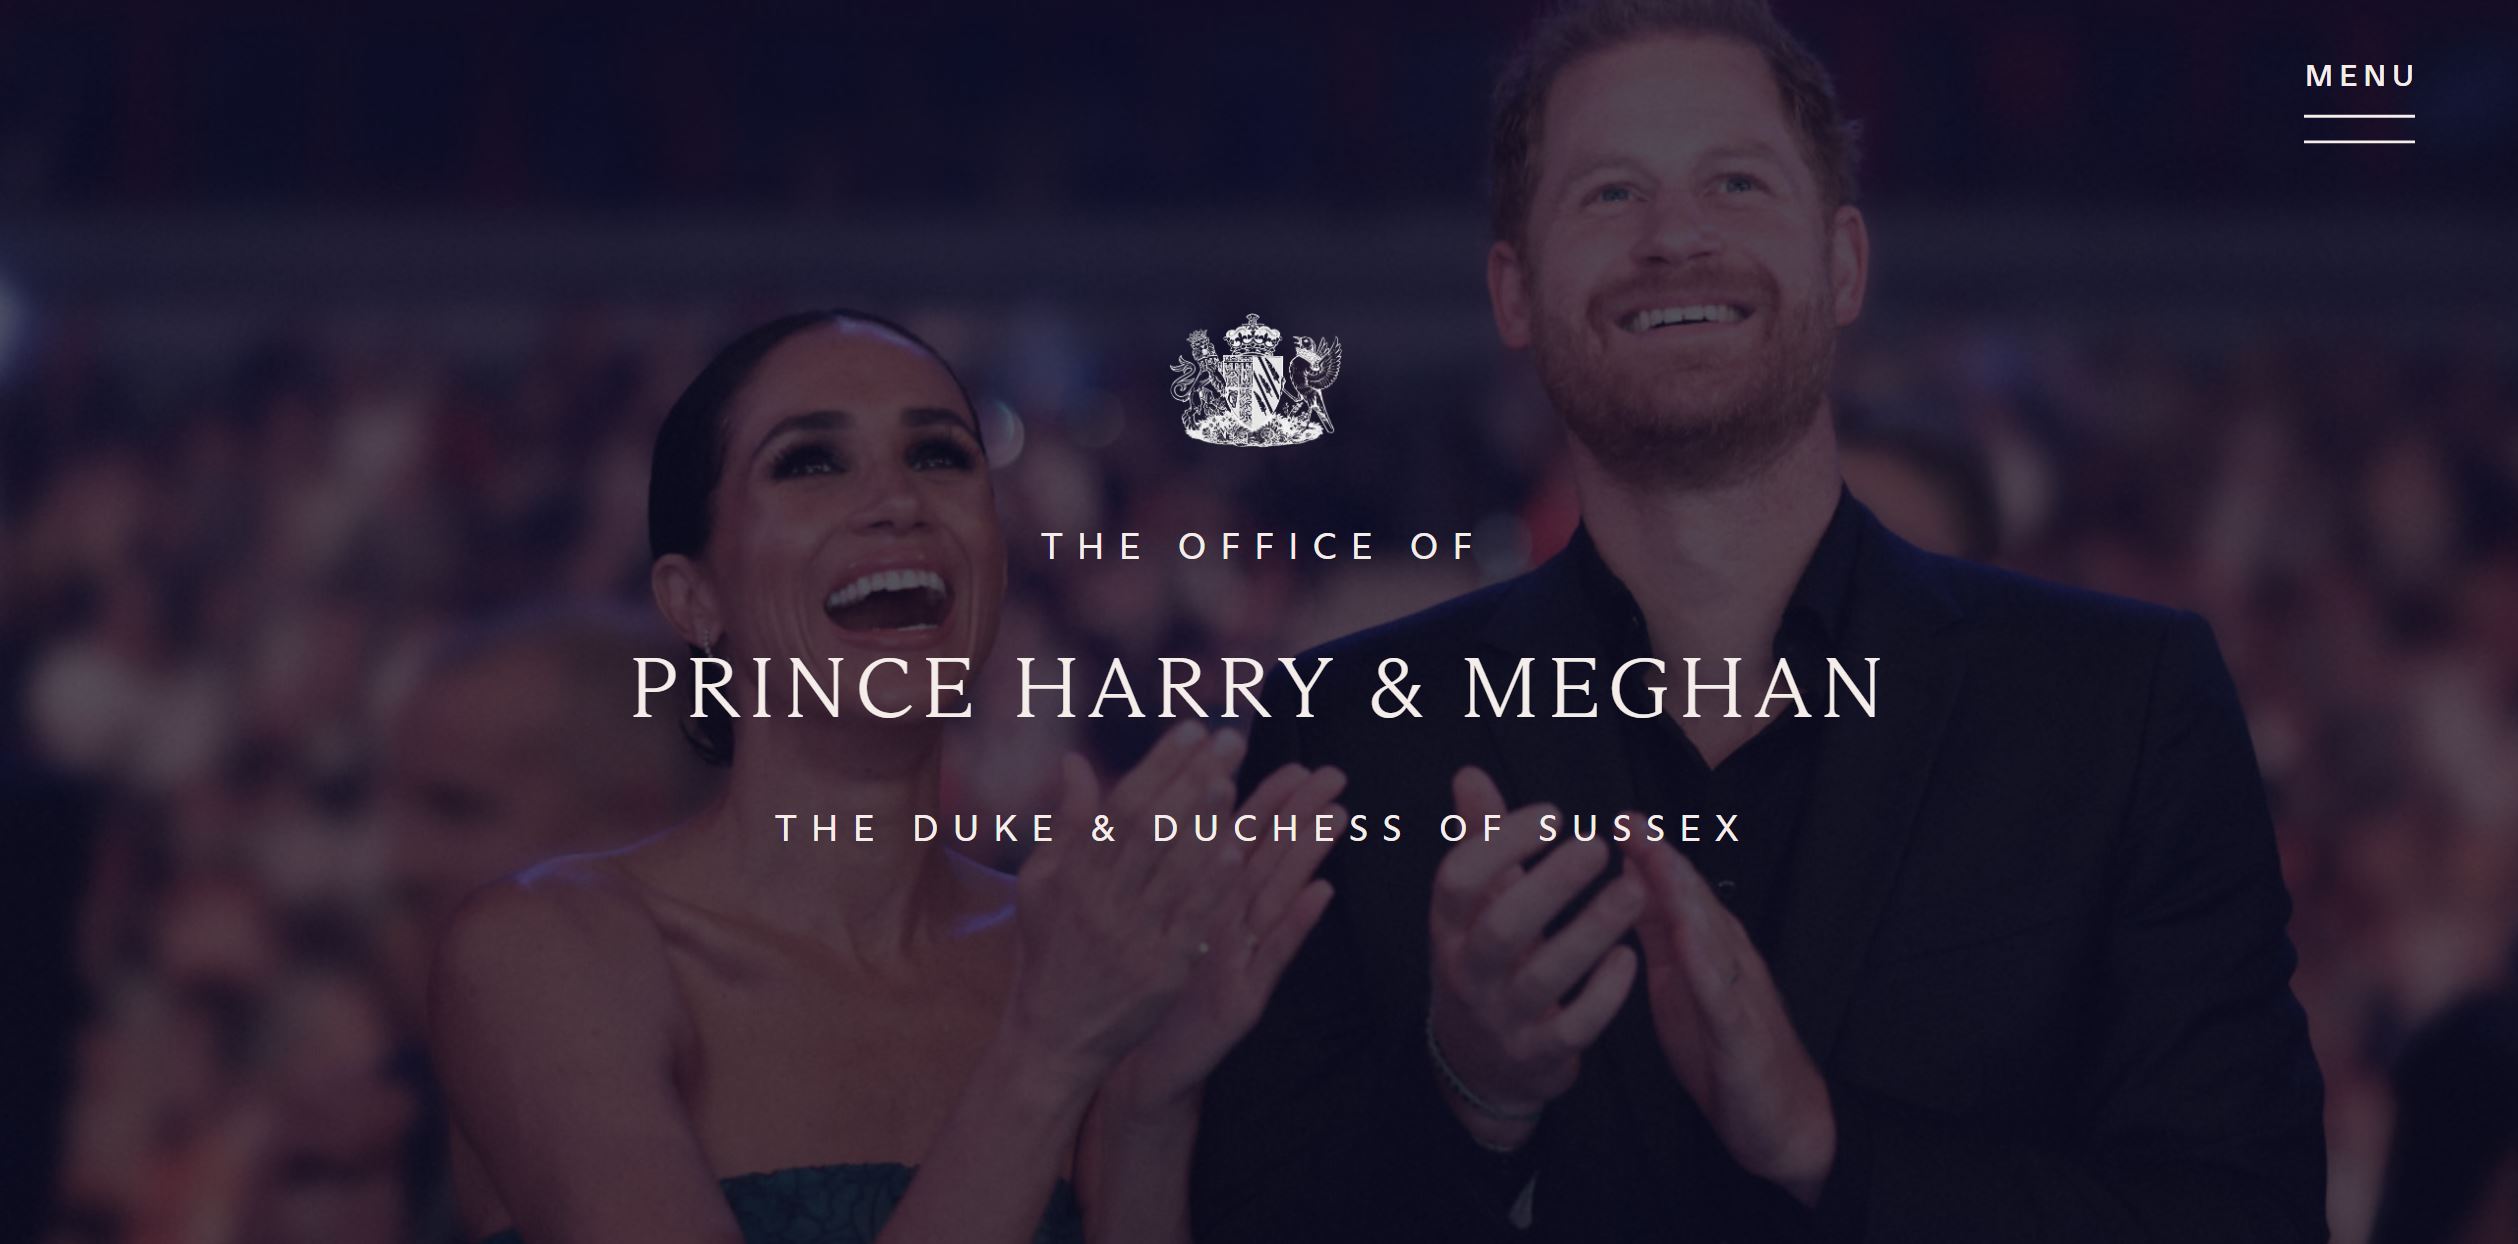 A screenshot of Prince Harry and Meghan's website sussex.com.